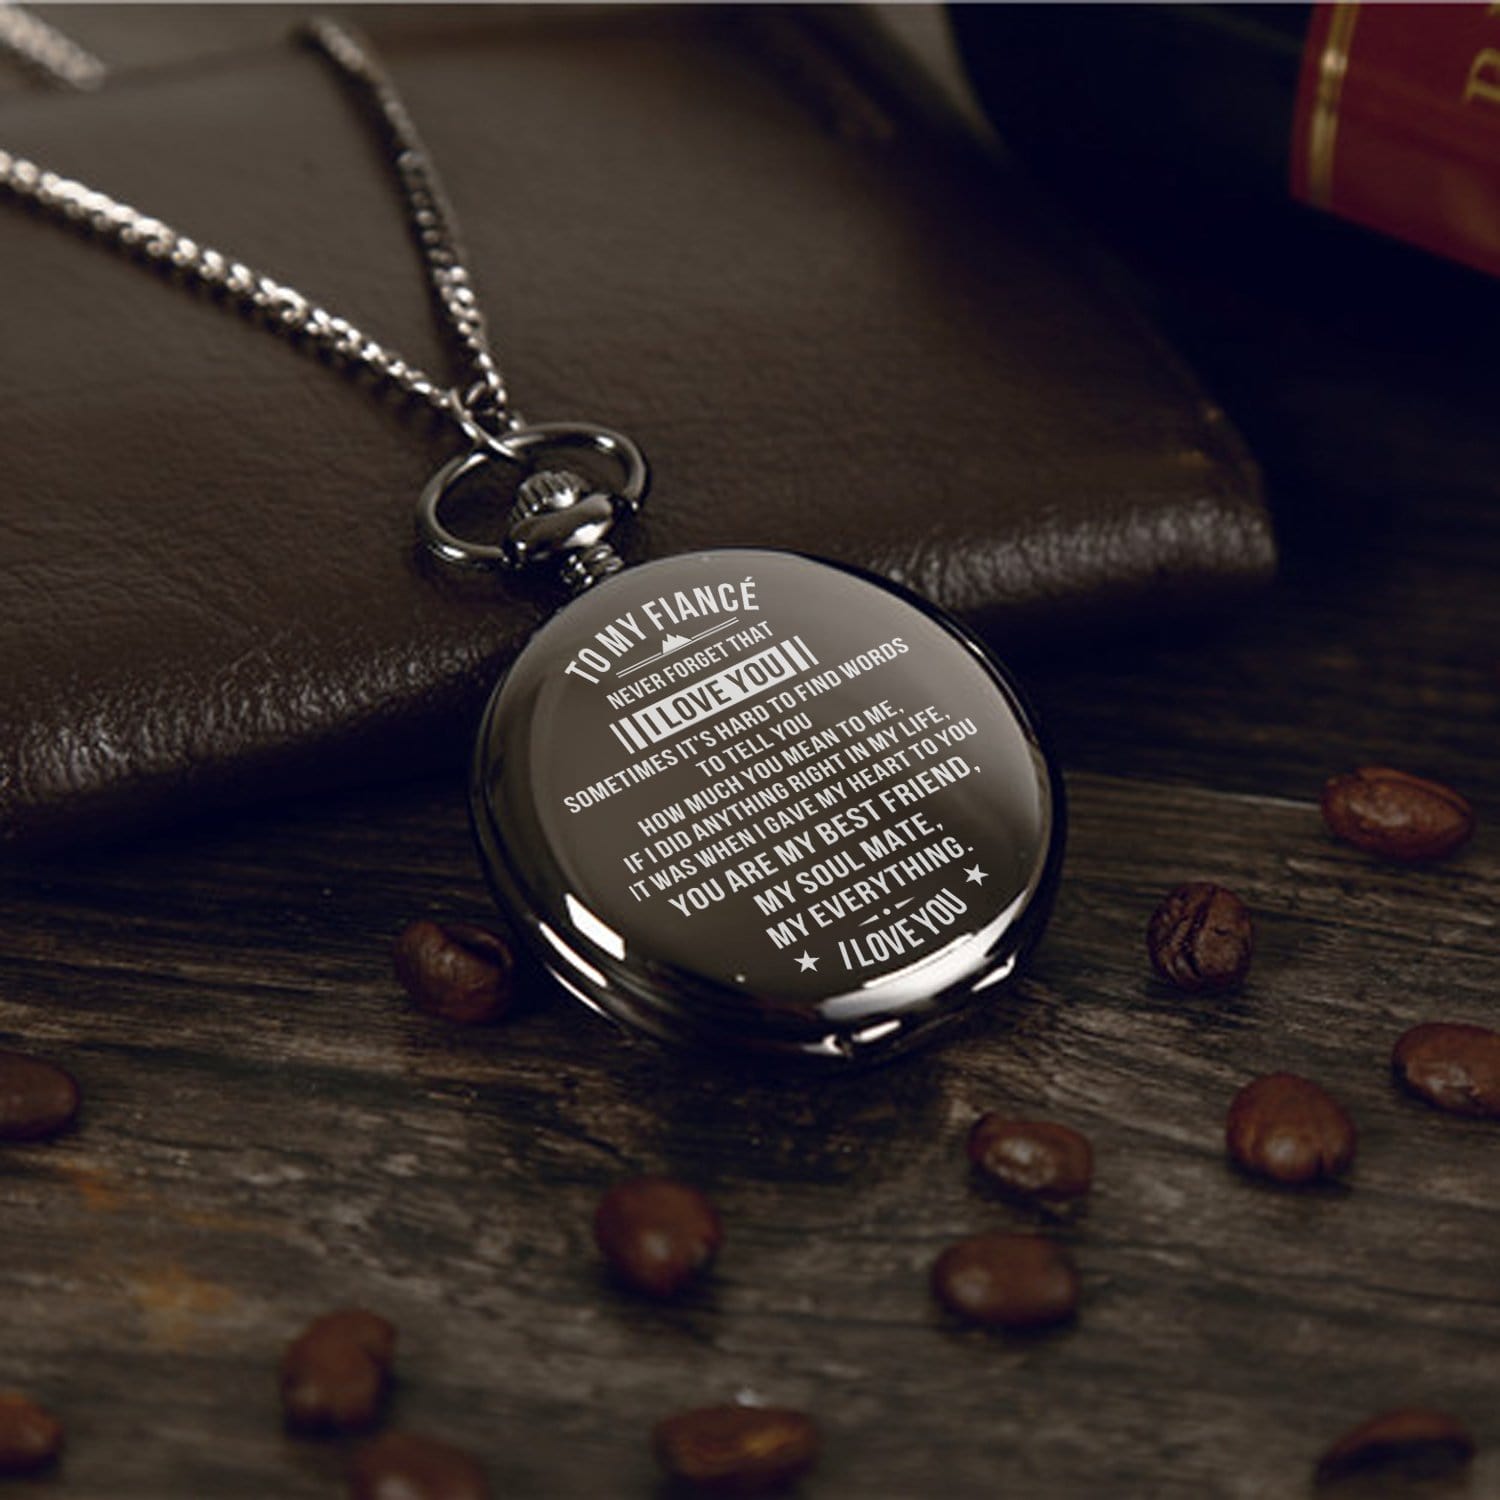 Pocket Watches To My Fiance - You Are My Everything Pocket Watch GiveMe-Gifts